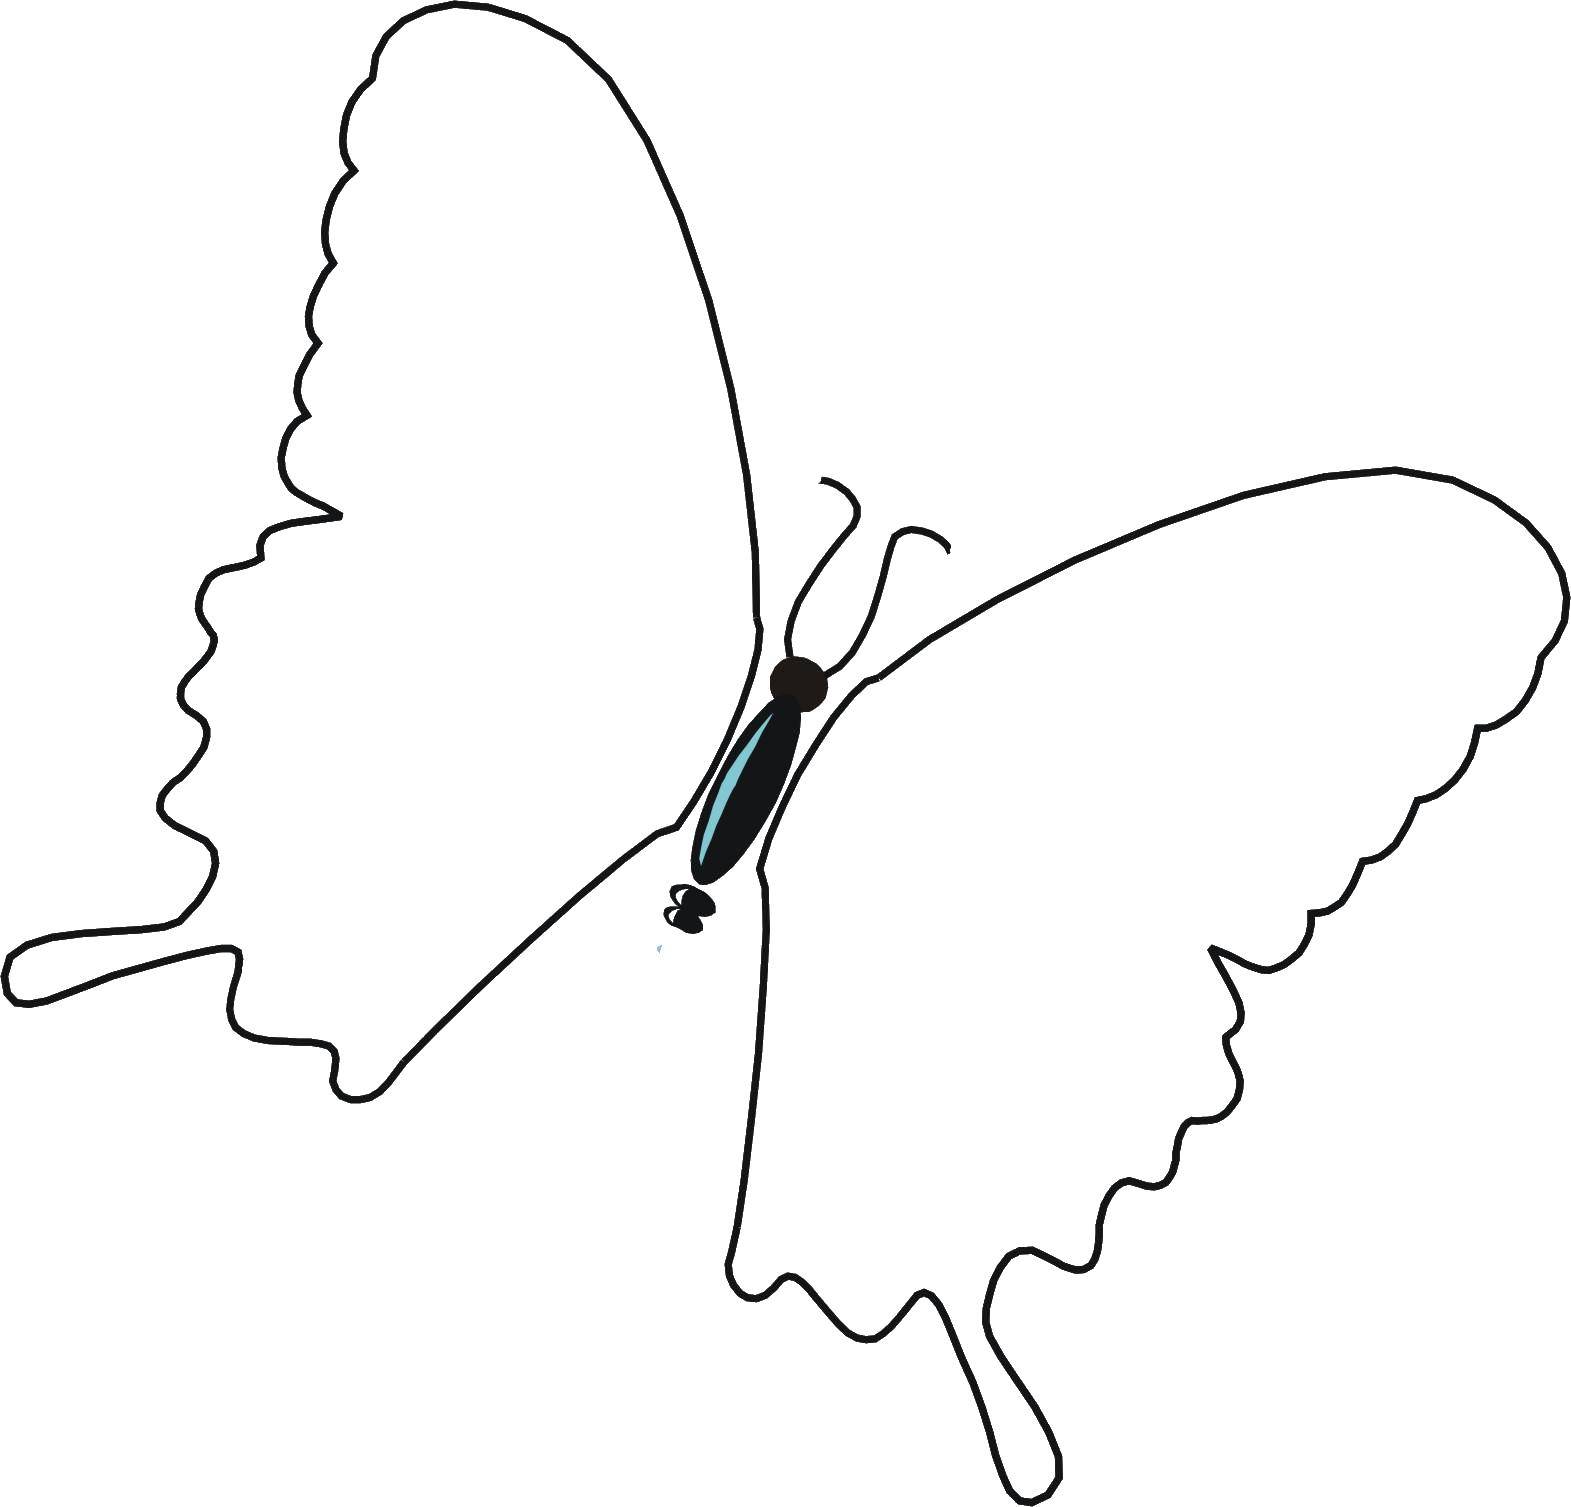 Coloring Butterfly. Category Insects. Tags:  insects, butterfly.